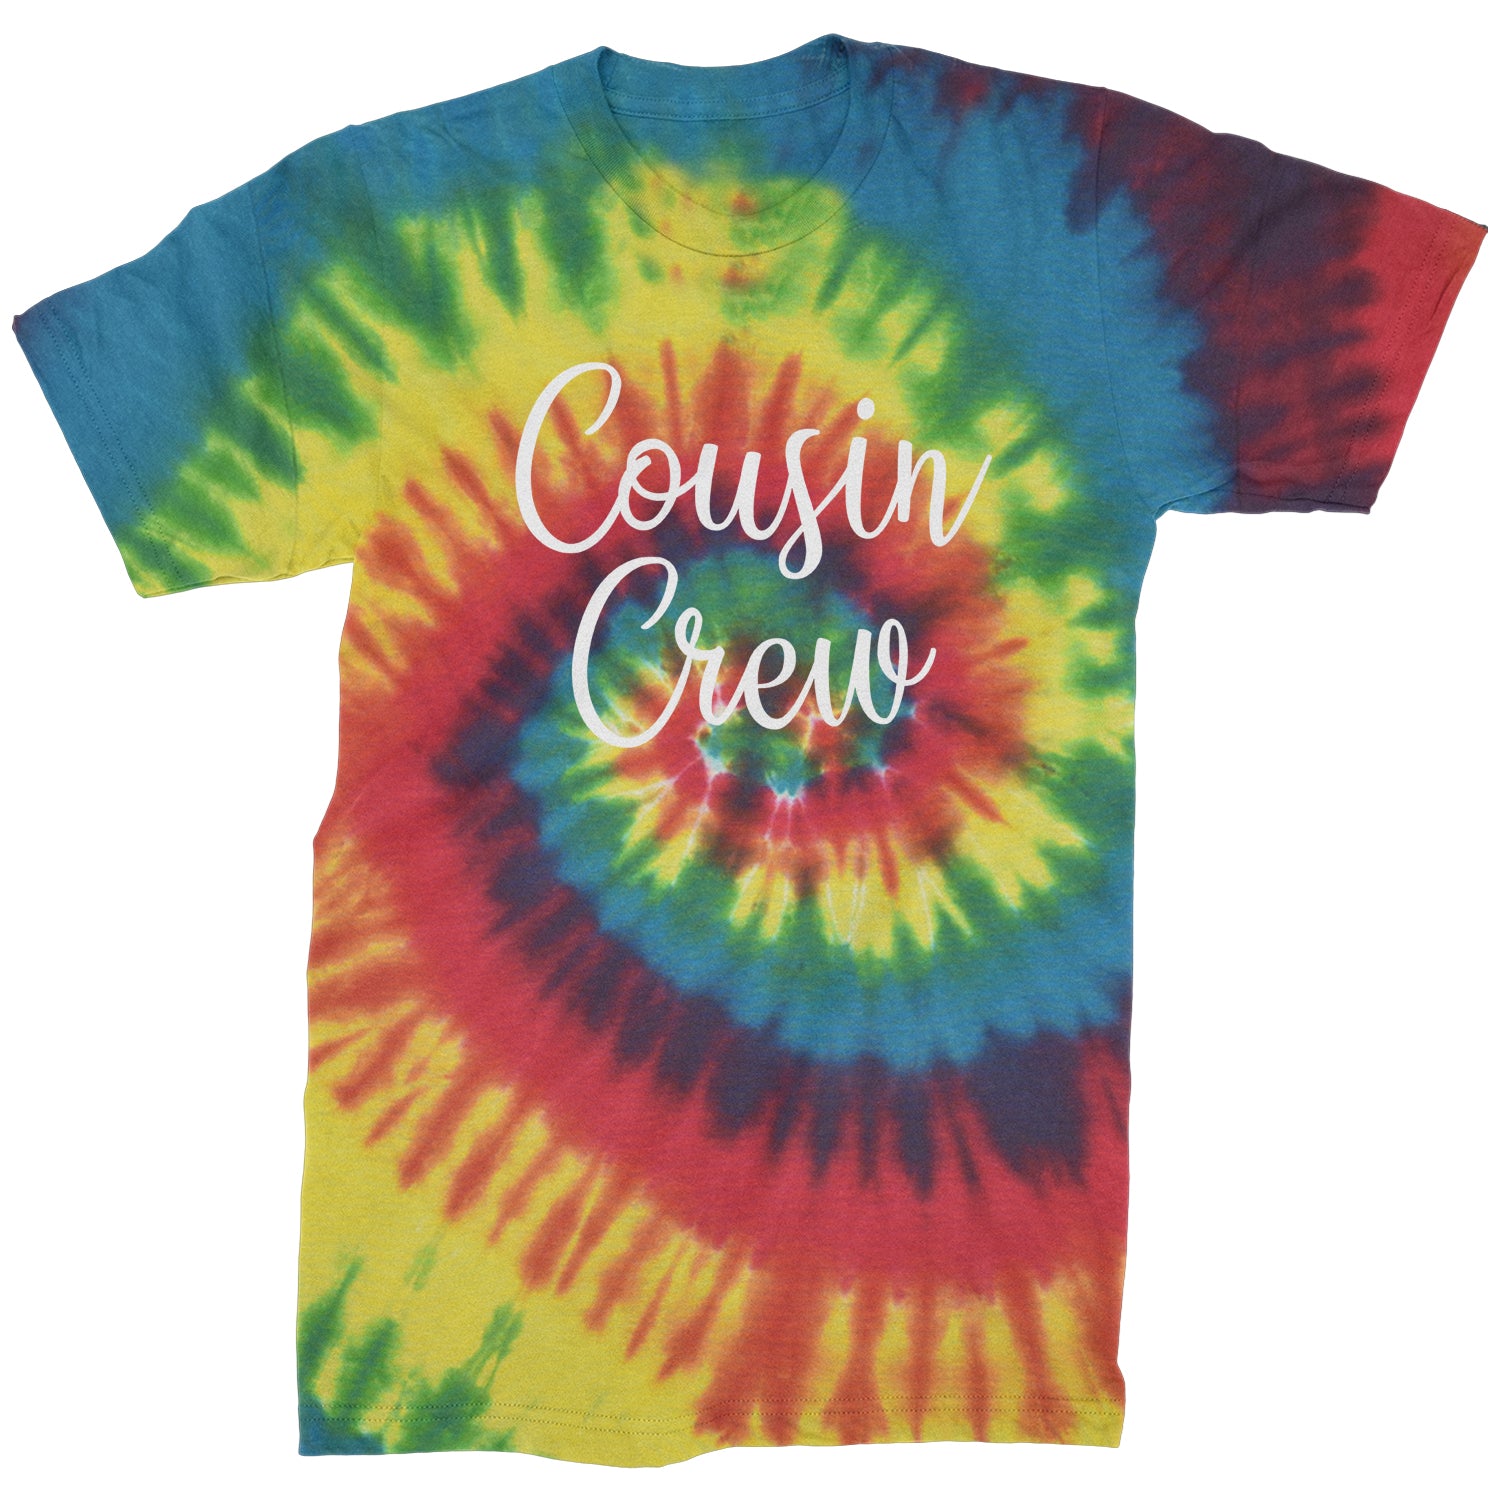 Cousin Crew Fun Family Outfit Mens T-shirt barbecue, bbq, cook, family, out, reunion by Expression Tees